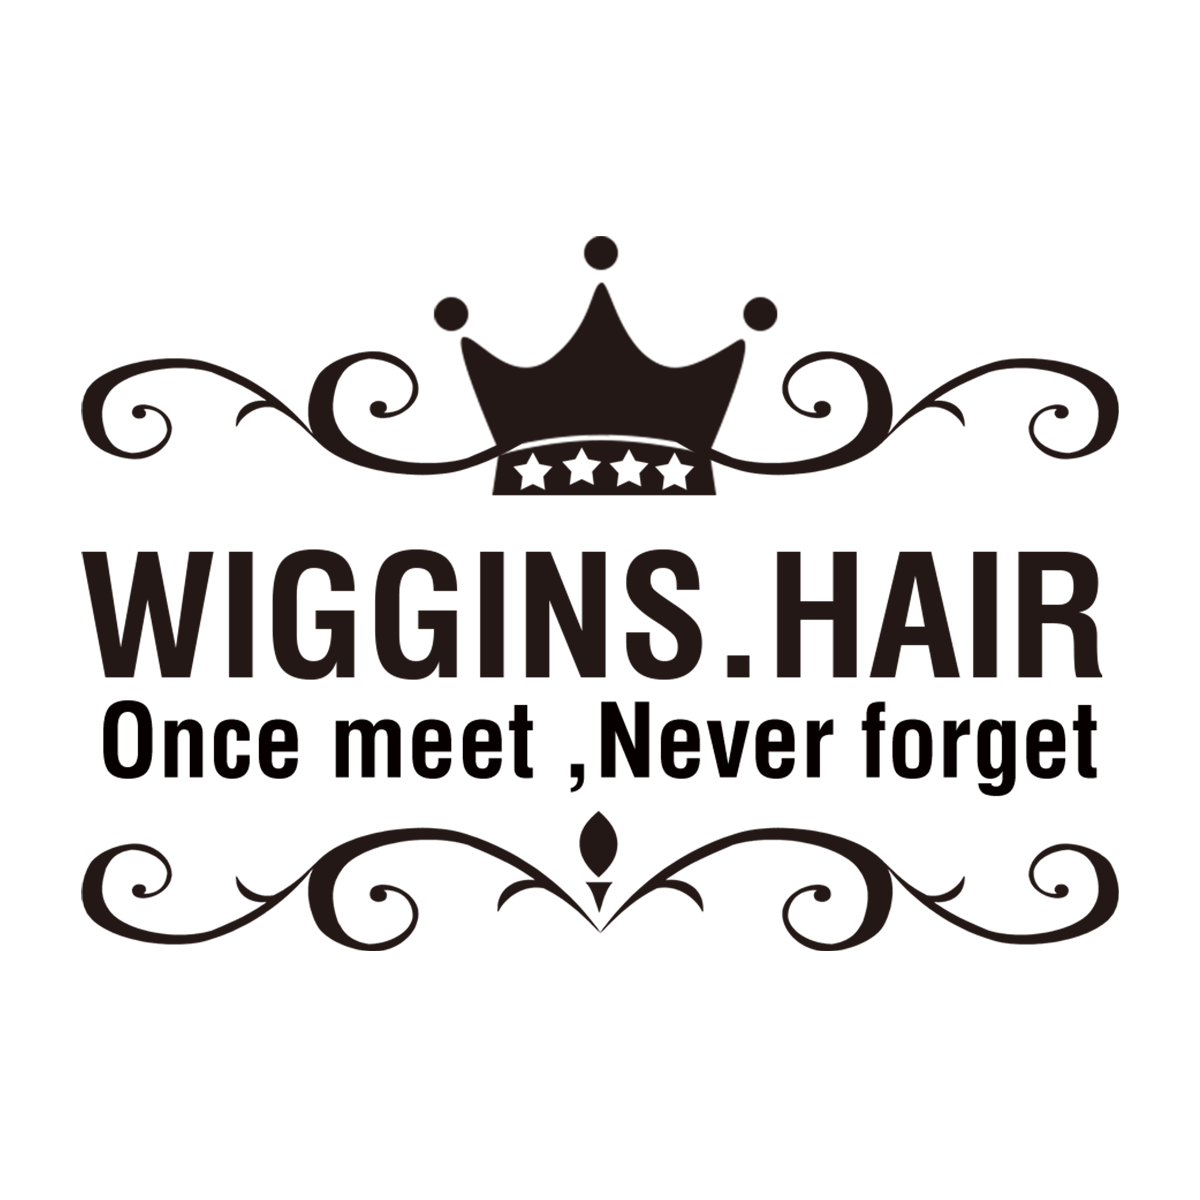 Extra Or Higher Discount For Wiggins Hair Black Friday